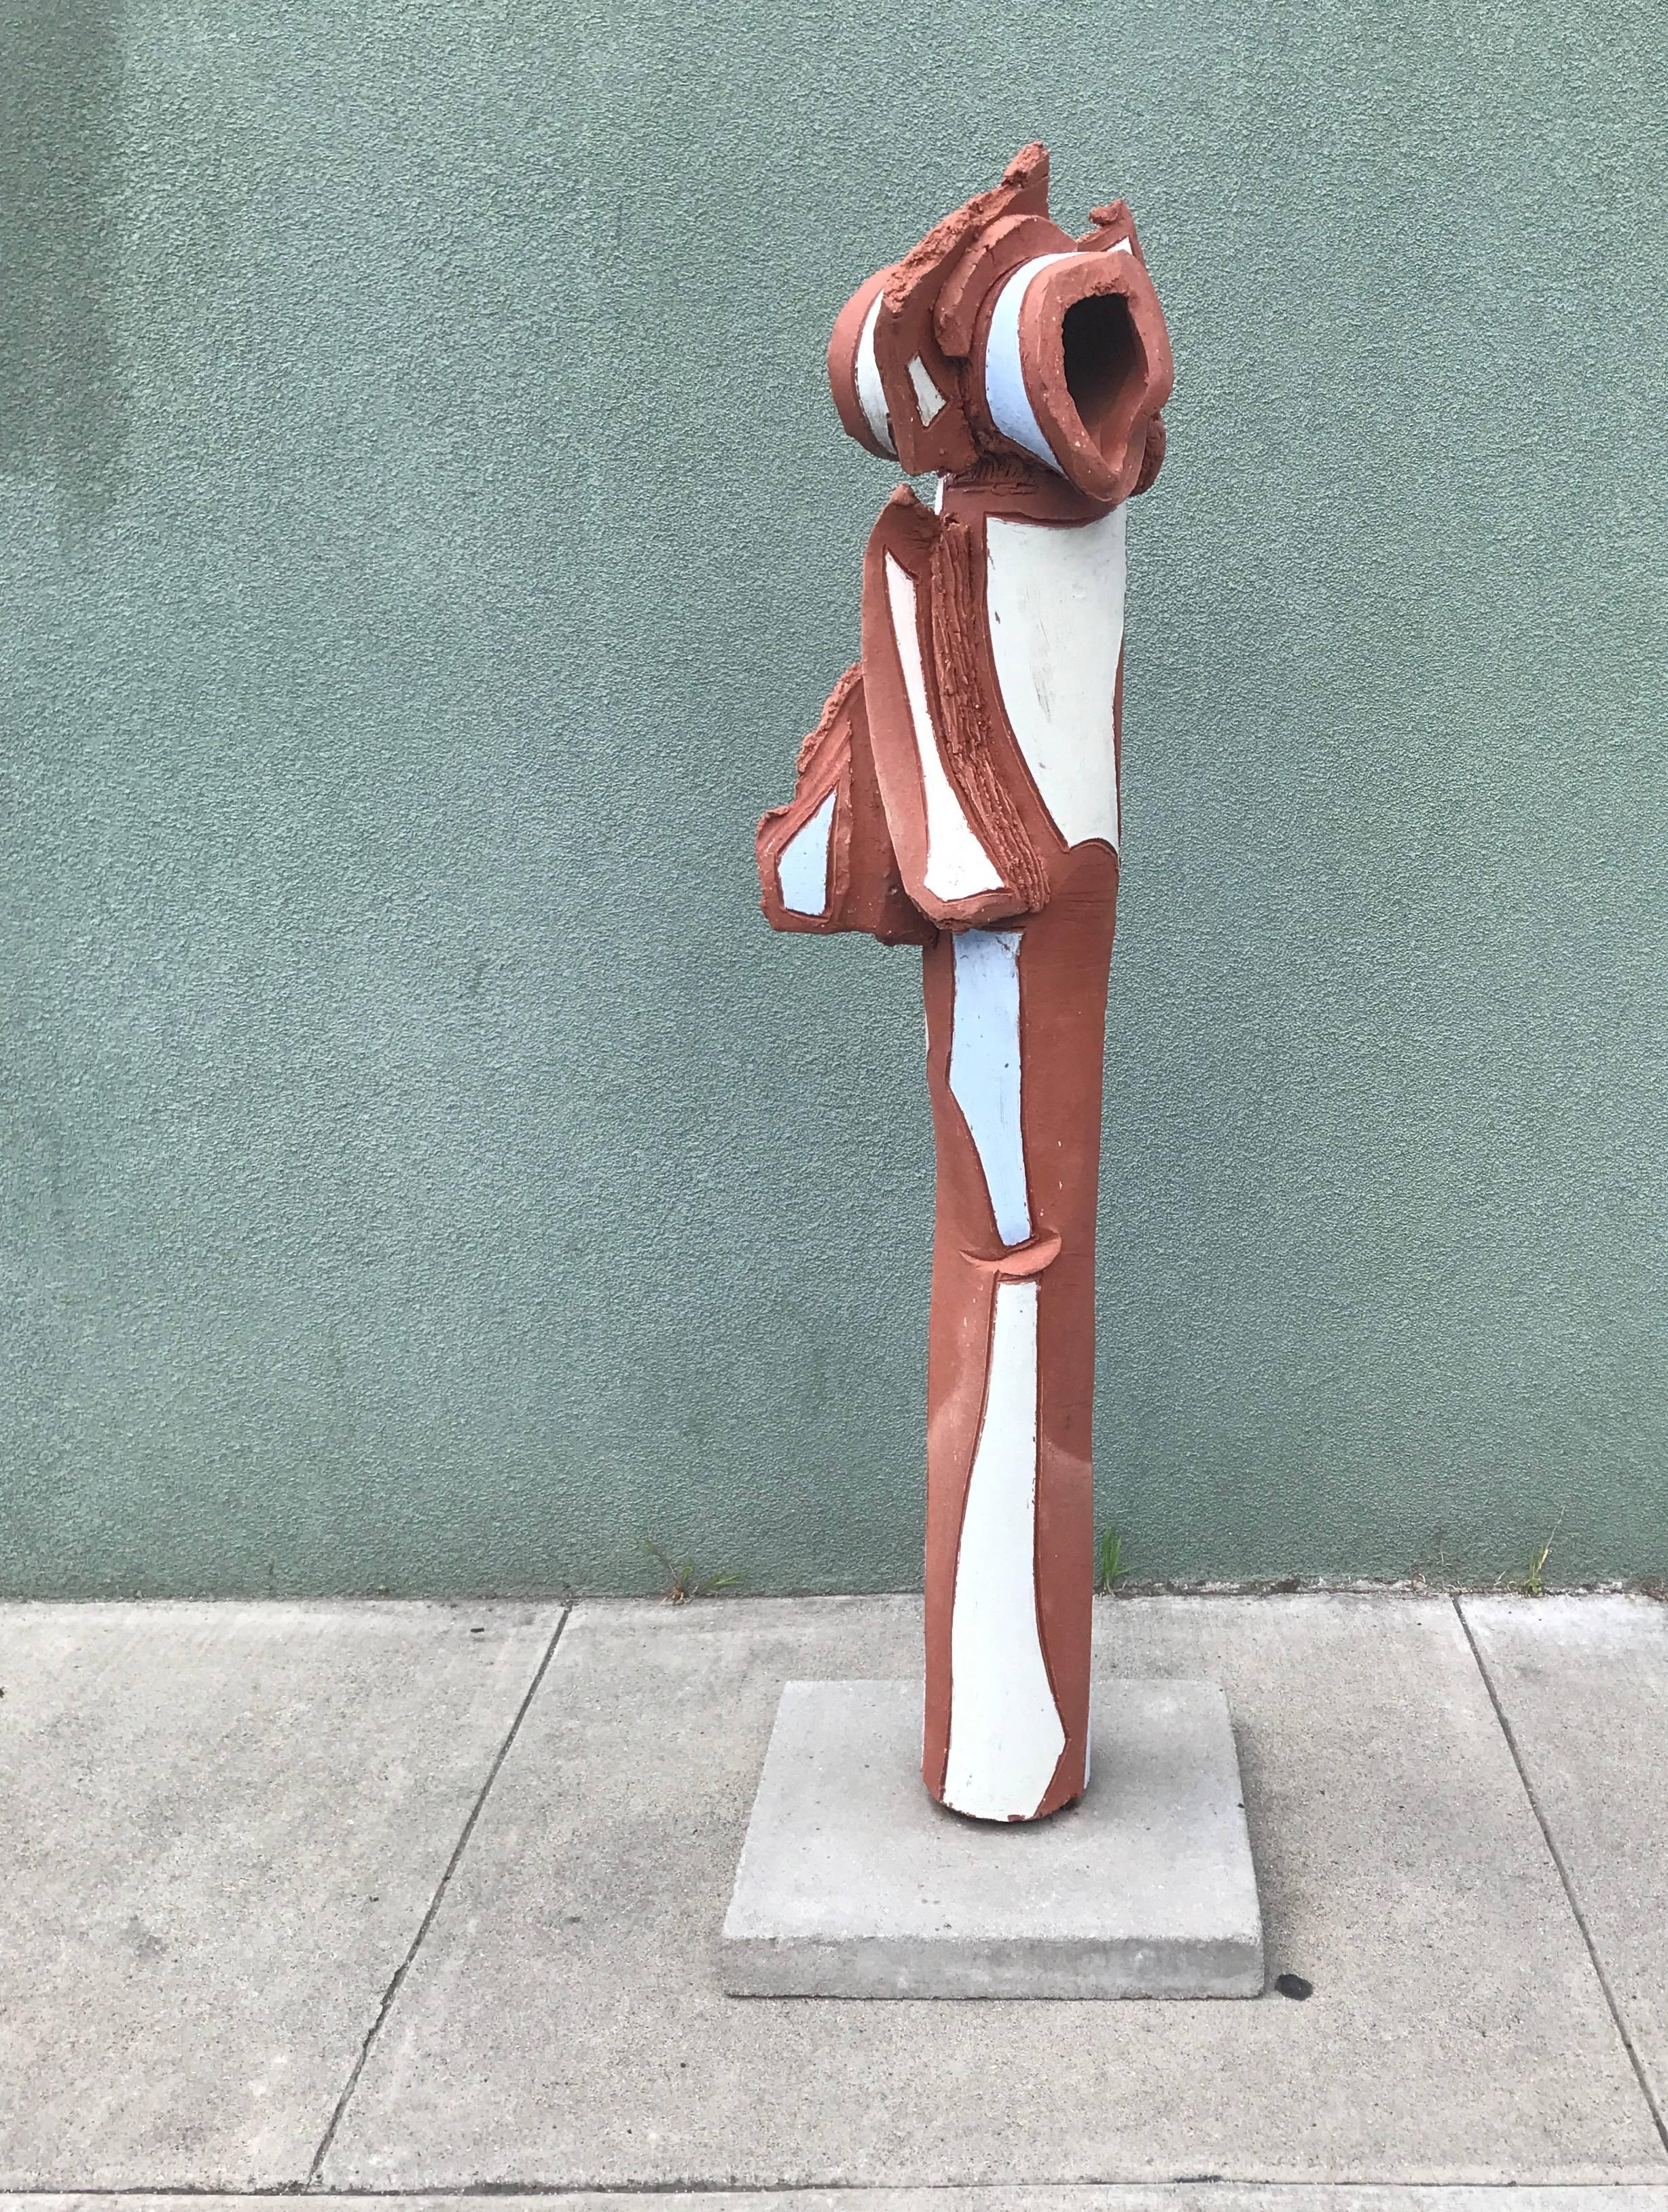 Large ceramic abstract or Brutalist sculpture in a natural red tone fired clay with selectively applied glazes, a cylindrical form in which the clay has been carved to create both repeating form and texture on its surface. The base is a grey tone